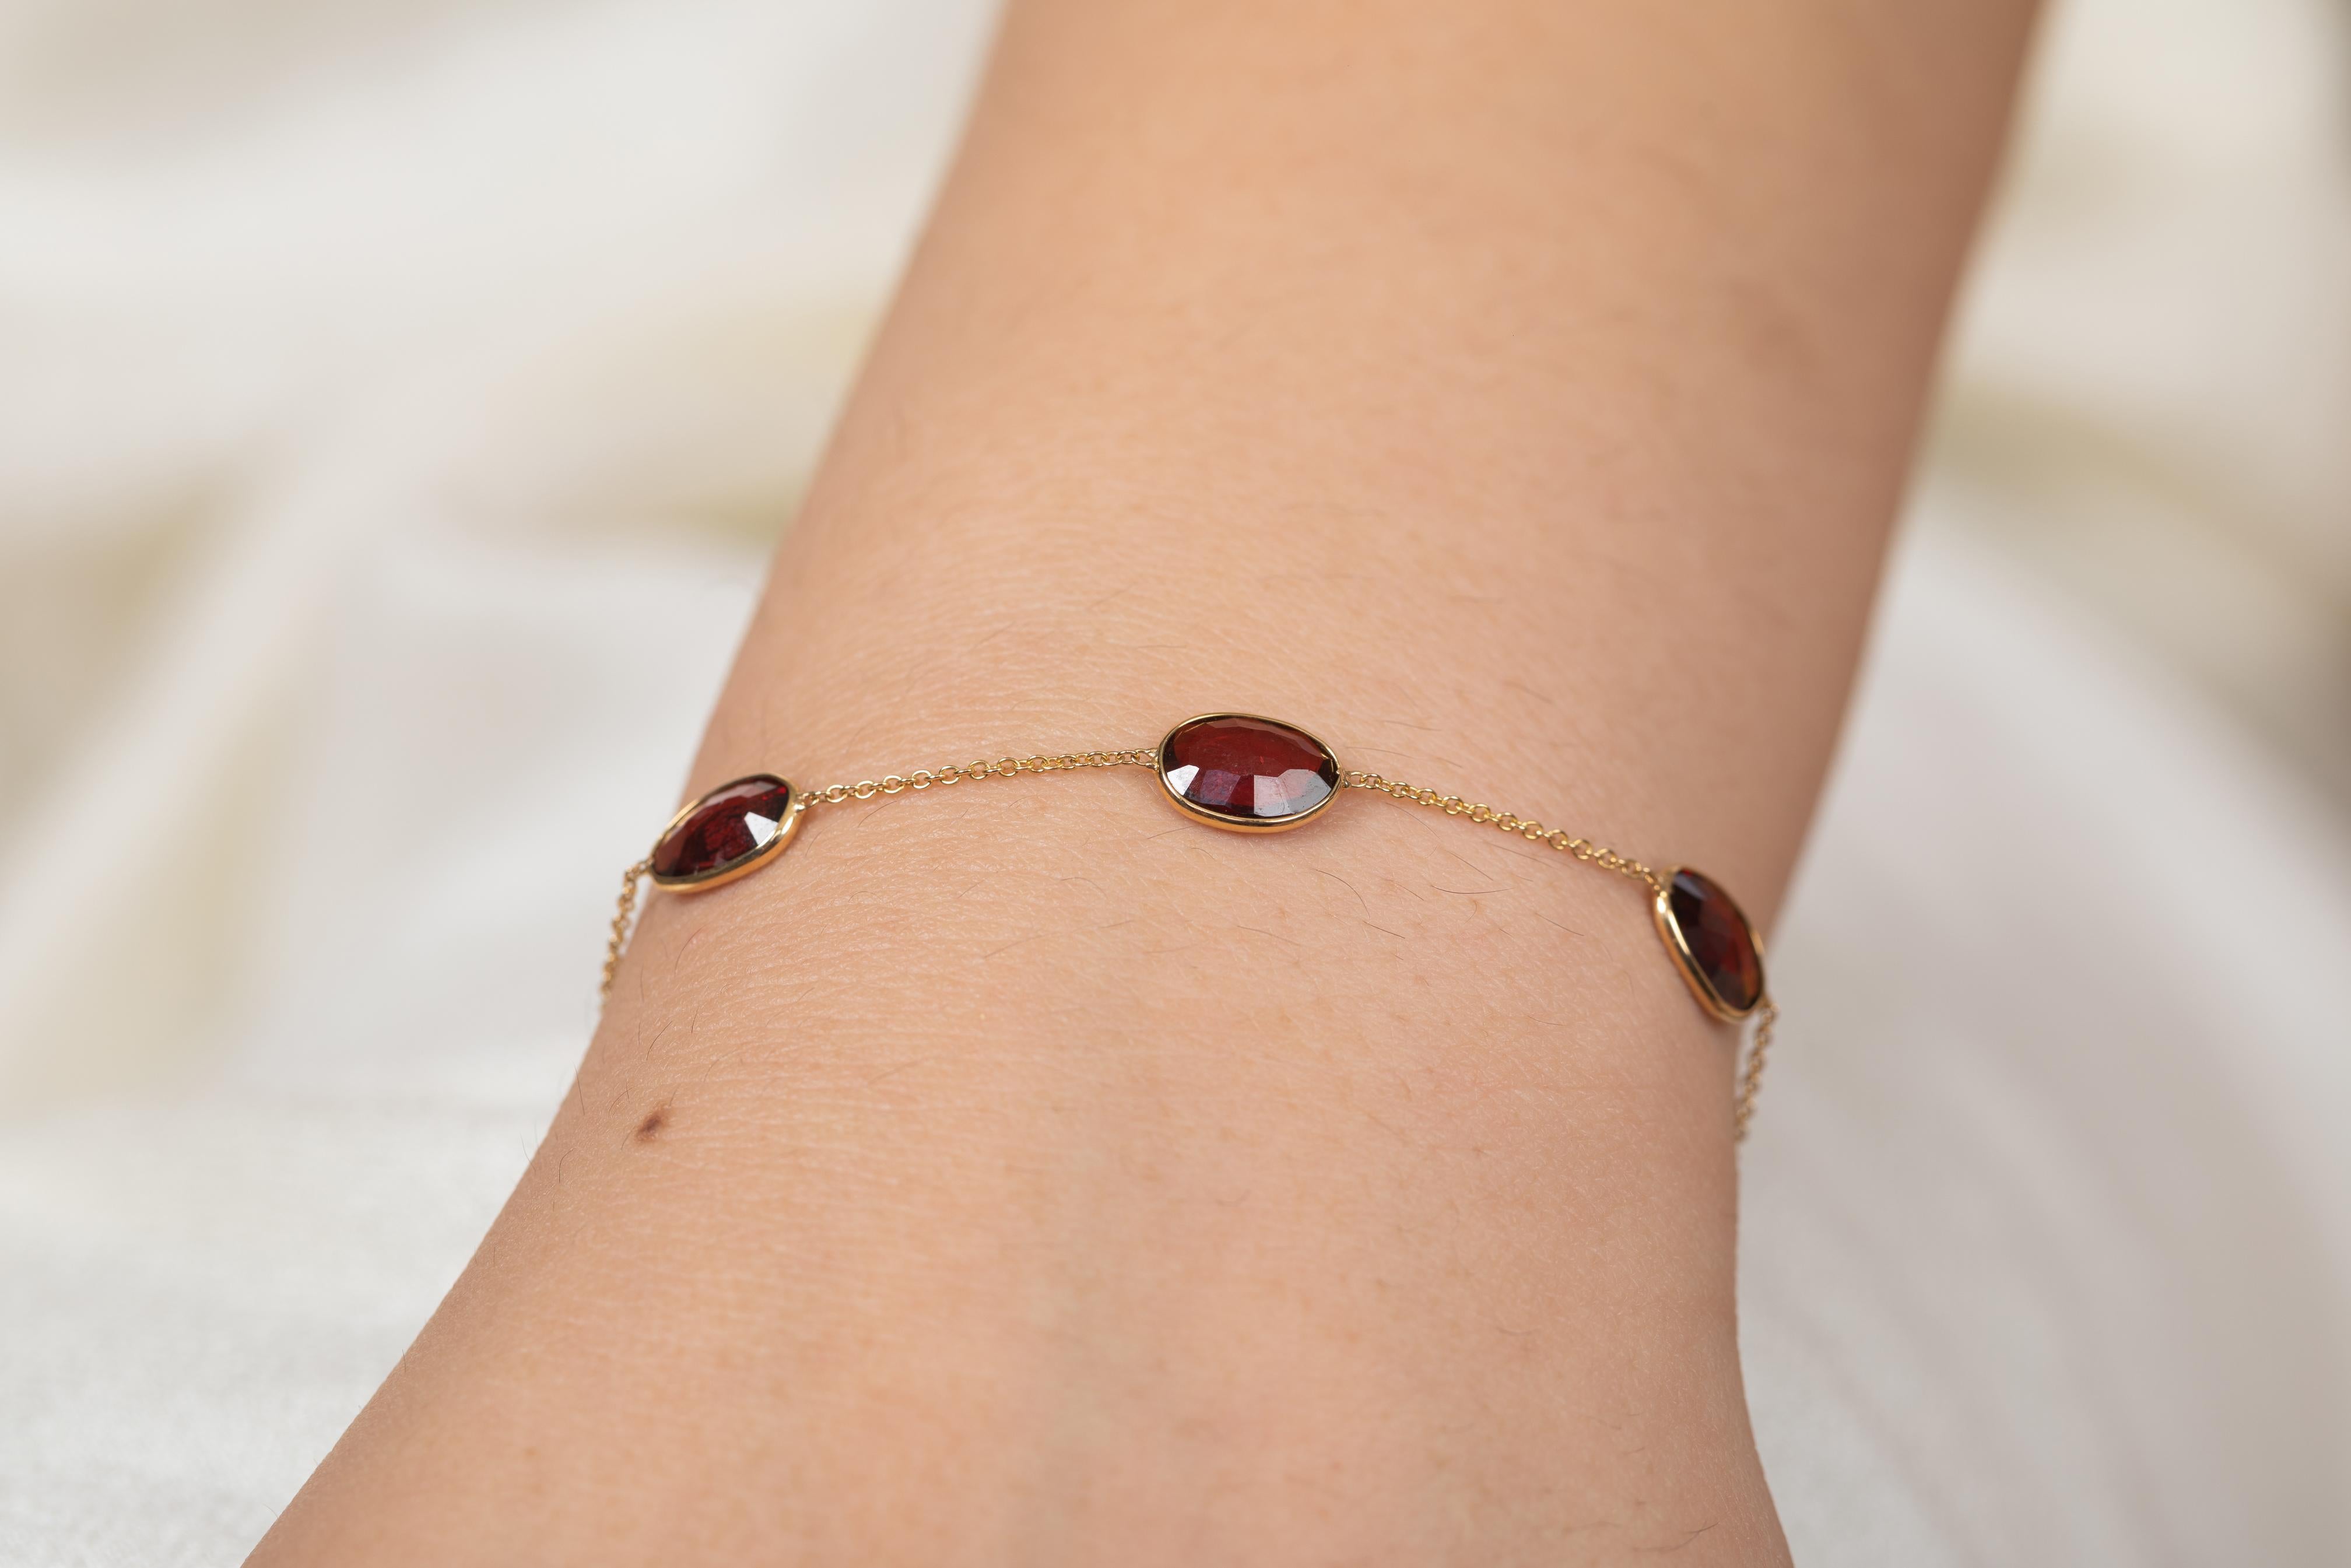 Bracelets are worn to enhance the look. Women love to look good. It is common to see a woman rocking a lovely gold bracelet on her wrist. A gold gemstone bracelet is the ultimate statement piece for every stylish woman.
Adorn your wrist with this